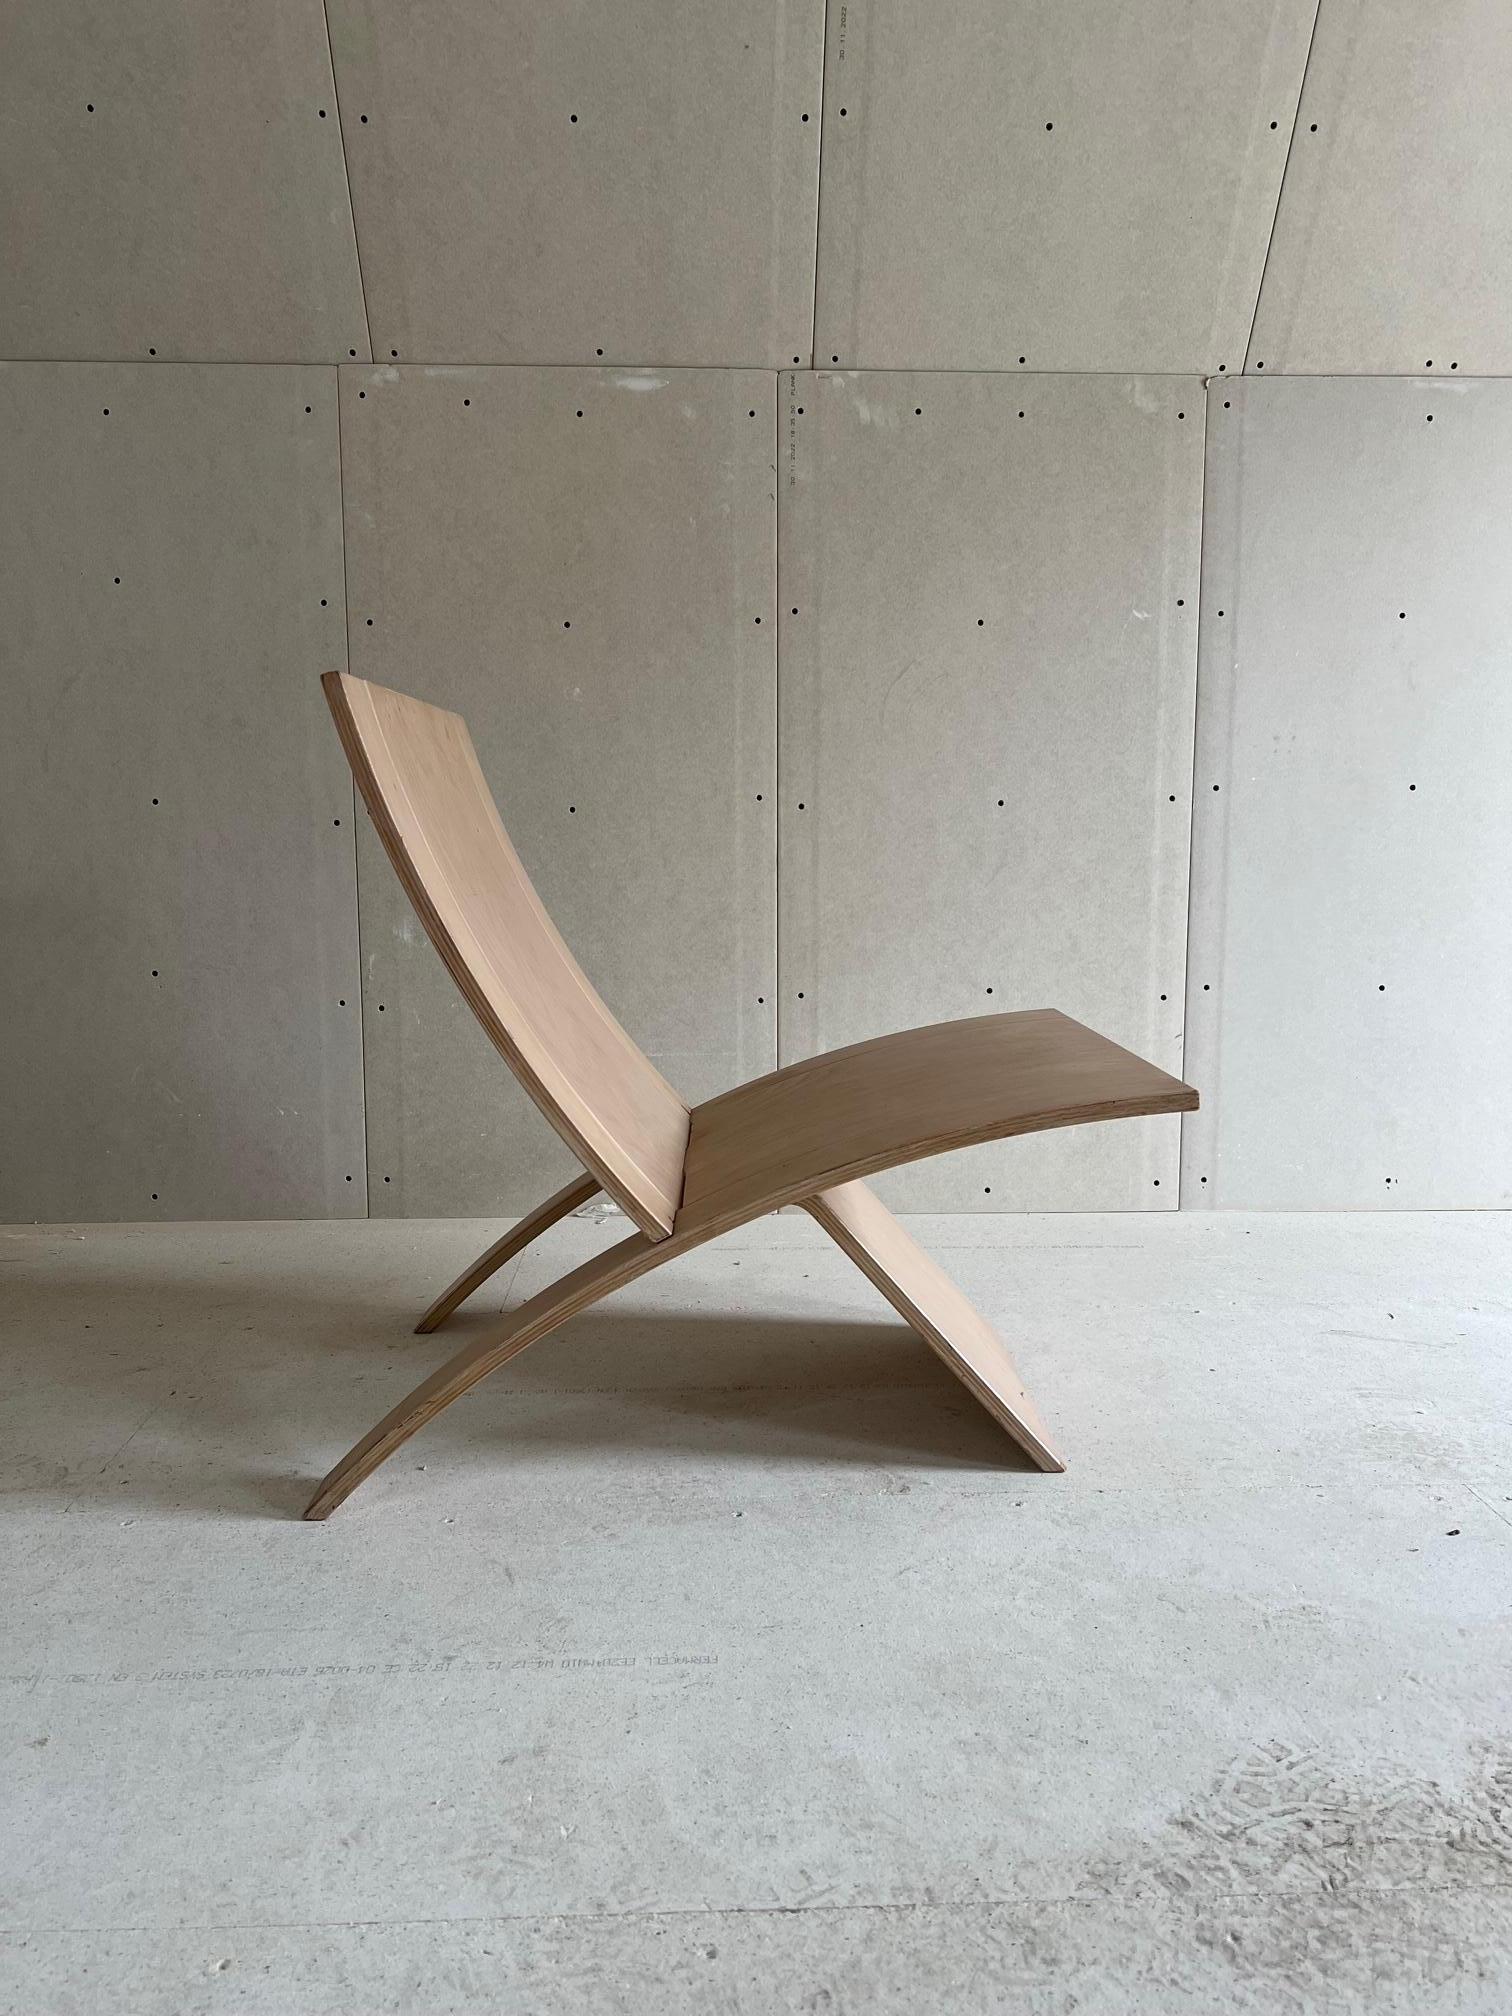 This two parted laminated beechwood chair is designed by Jens Nielsen. It's actually inspired by Wegners JH512. The minimalistic design and surprisingly comfortable sit make this chair really suitable for any room.

This lounge chair has been